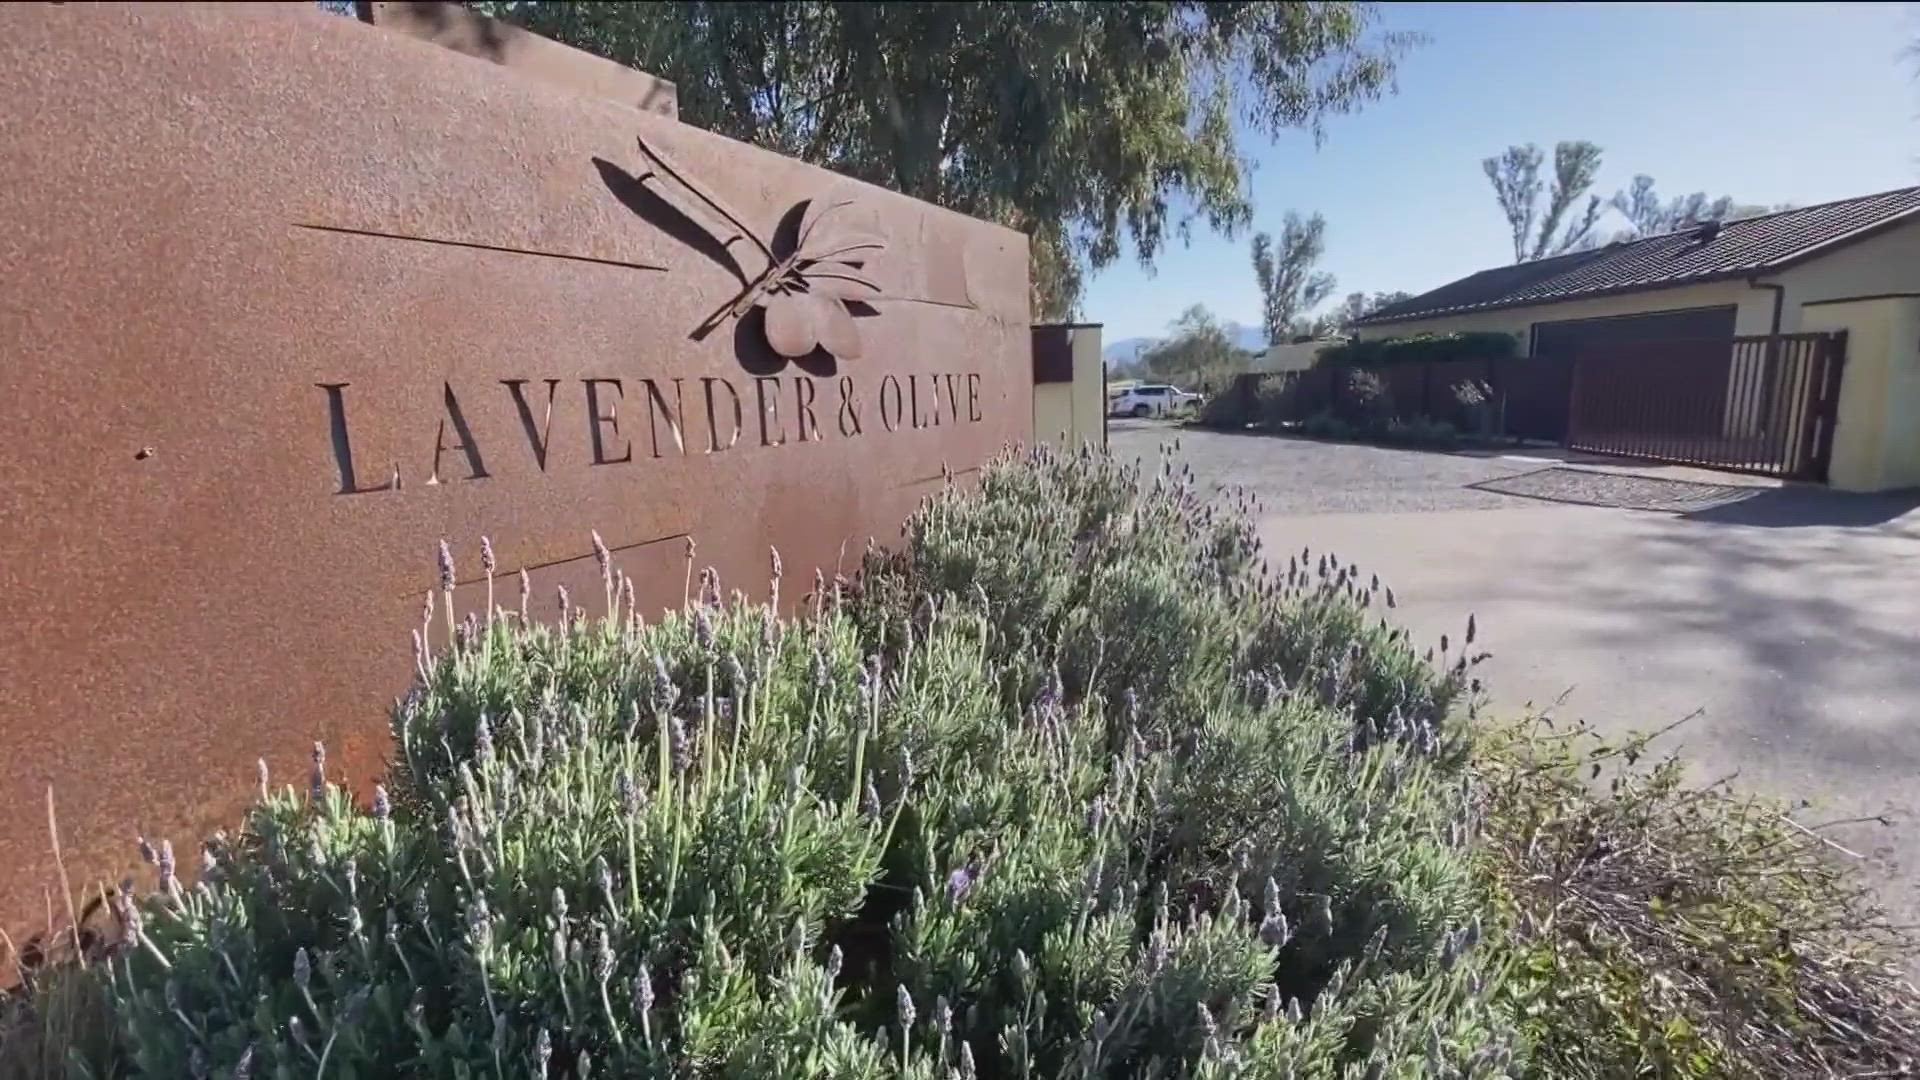 Lavender and Olive San Diego offer free weddings to five lucky couples. Two couples will tie the knot on February 14th.